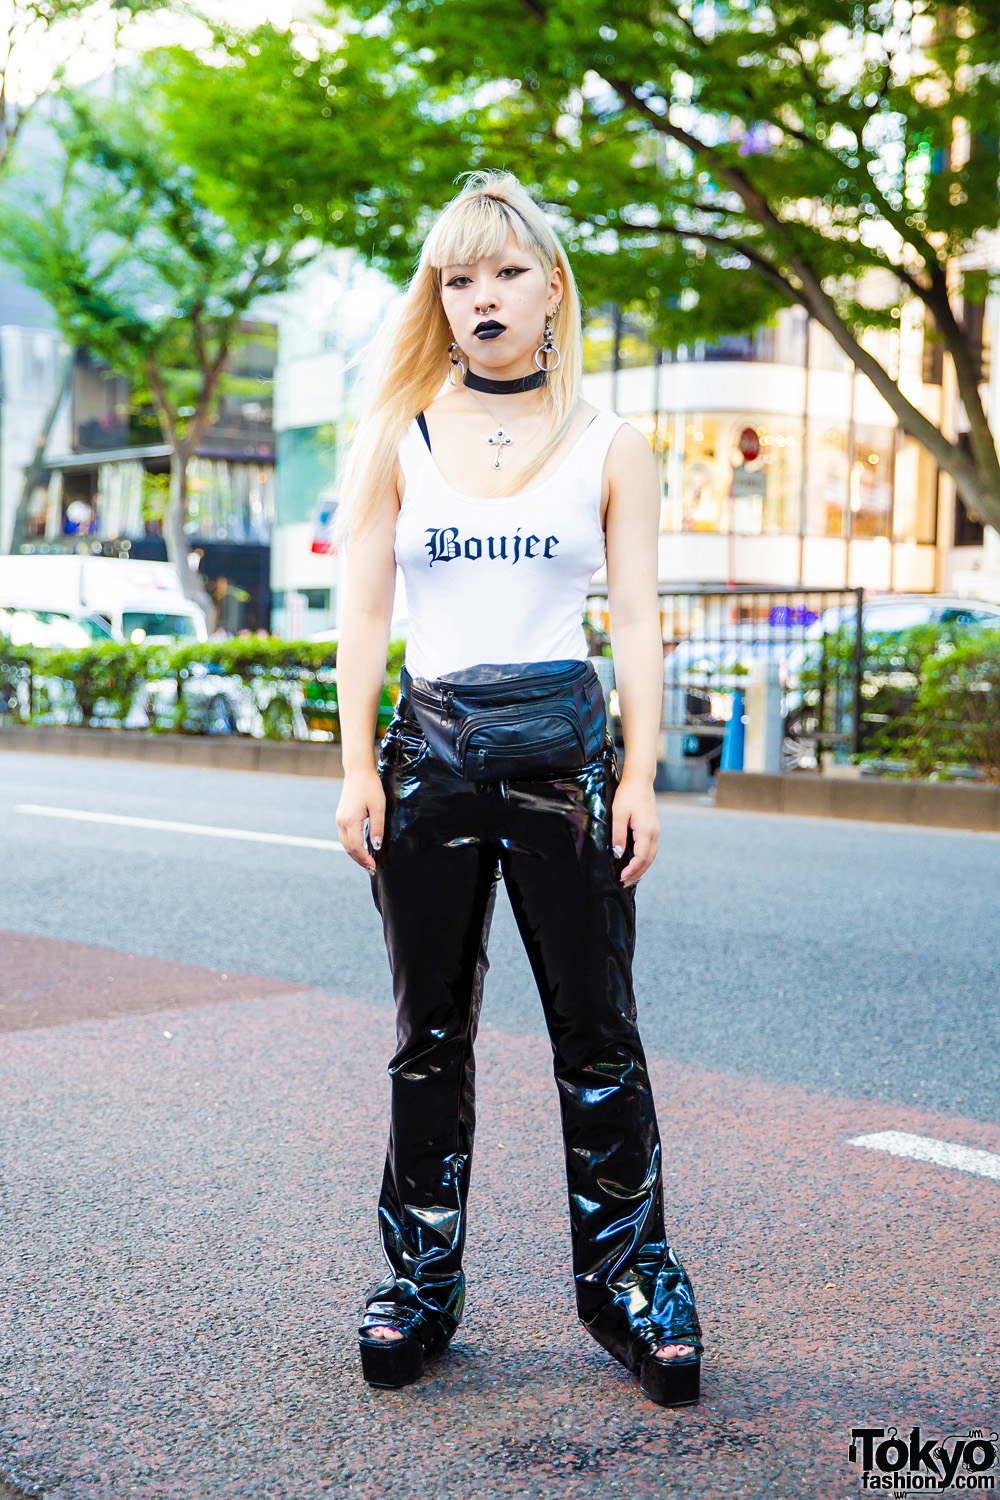 Harajuku Girl's Gothic Punk Street Style w/ Forever21 Boujee Top, UNIF Patent Pants, MYOB NYC Earrings, Amijed Cross Necklace & Jeweled Nail Art